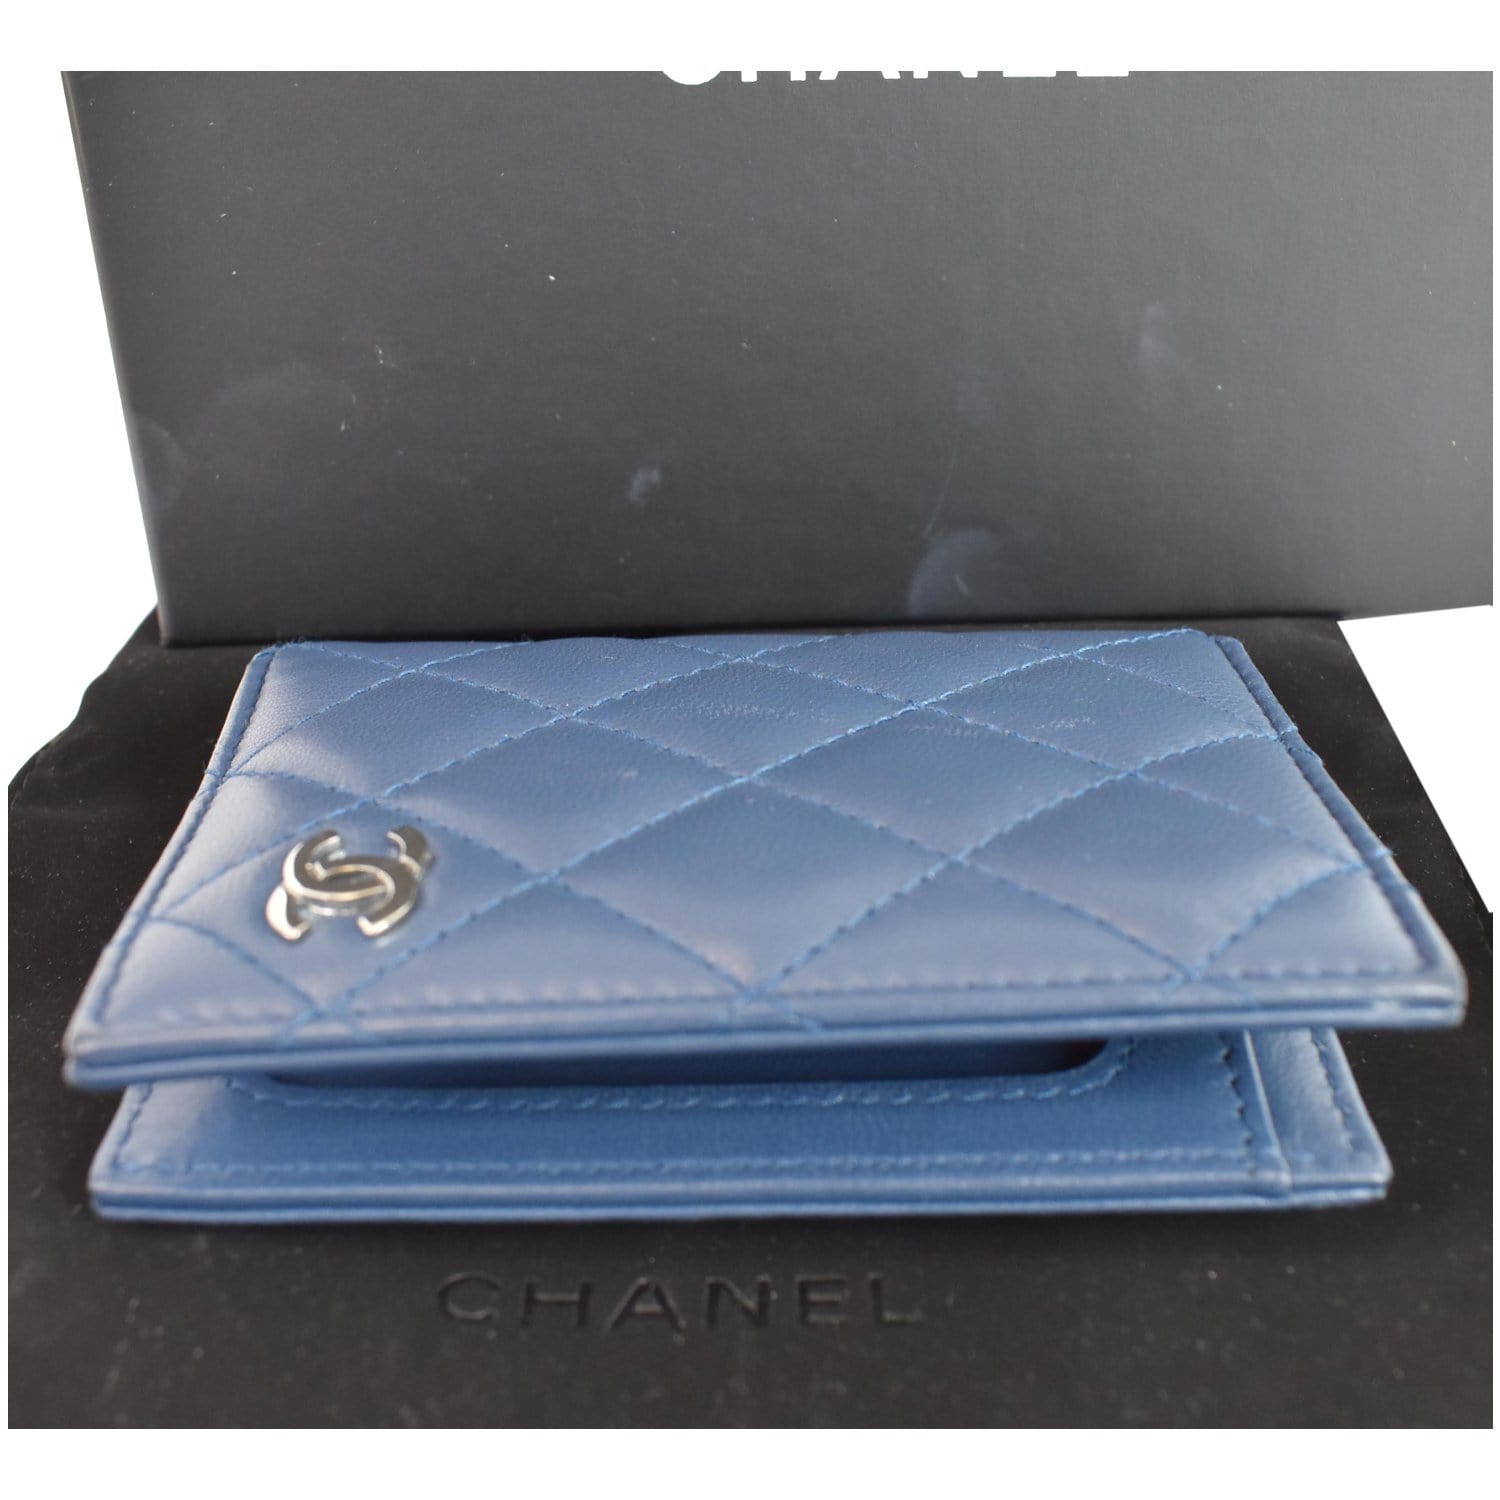 Timeless/classique leather wallet Chanel Black in Leather - 38731229